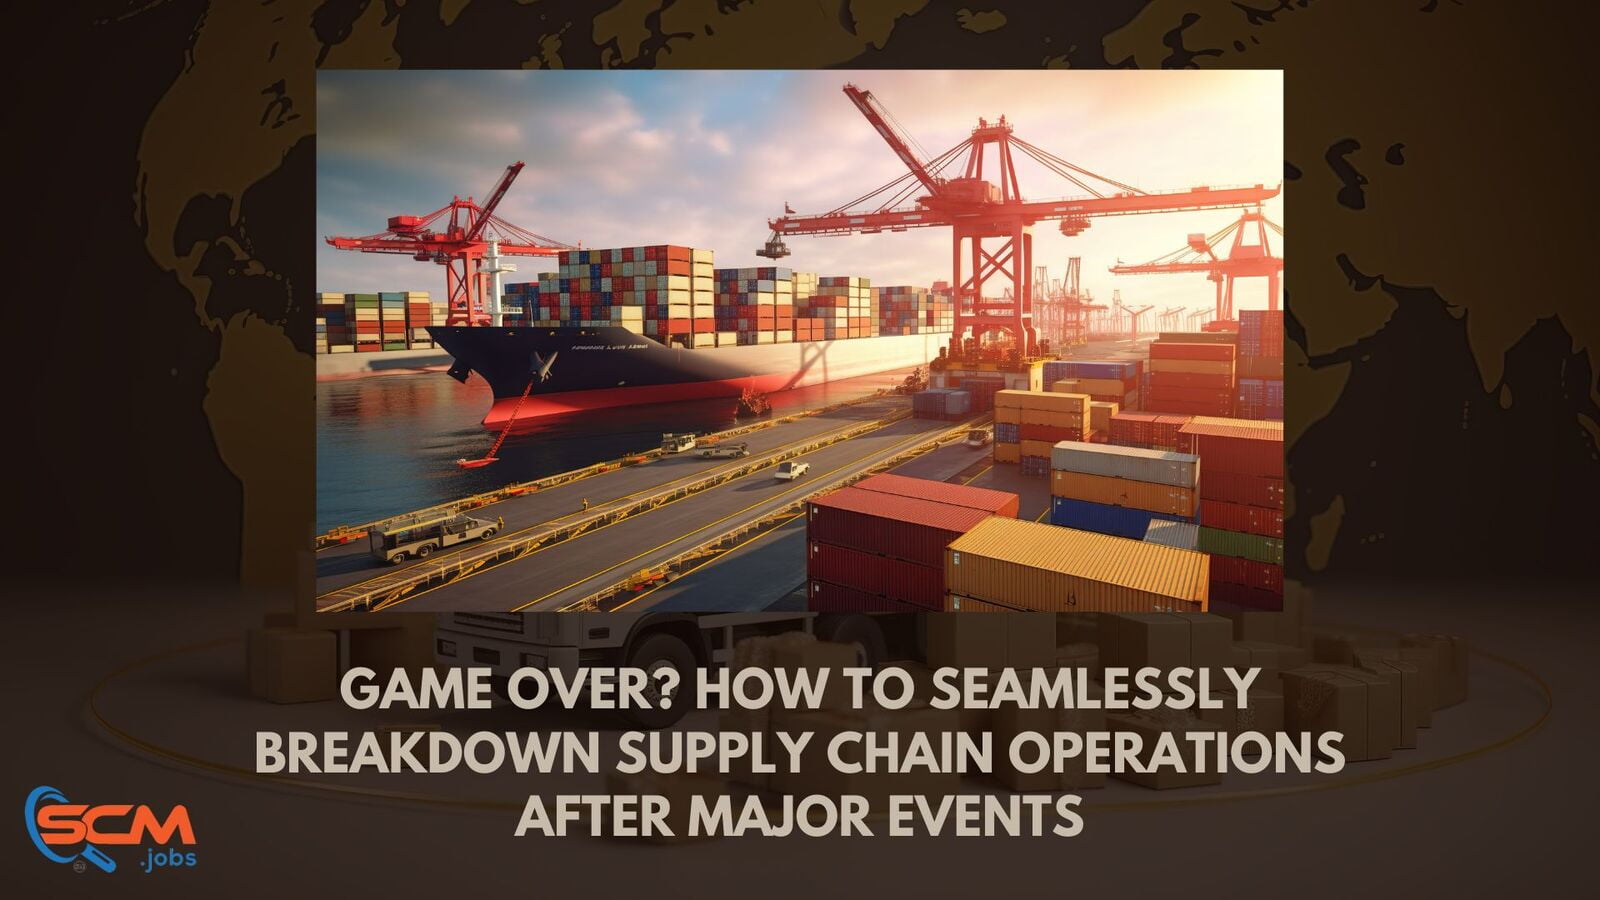 Game Over? How to Seamlessly Breakdown Supply Chain Operations After Major Events